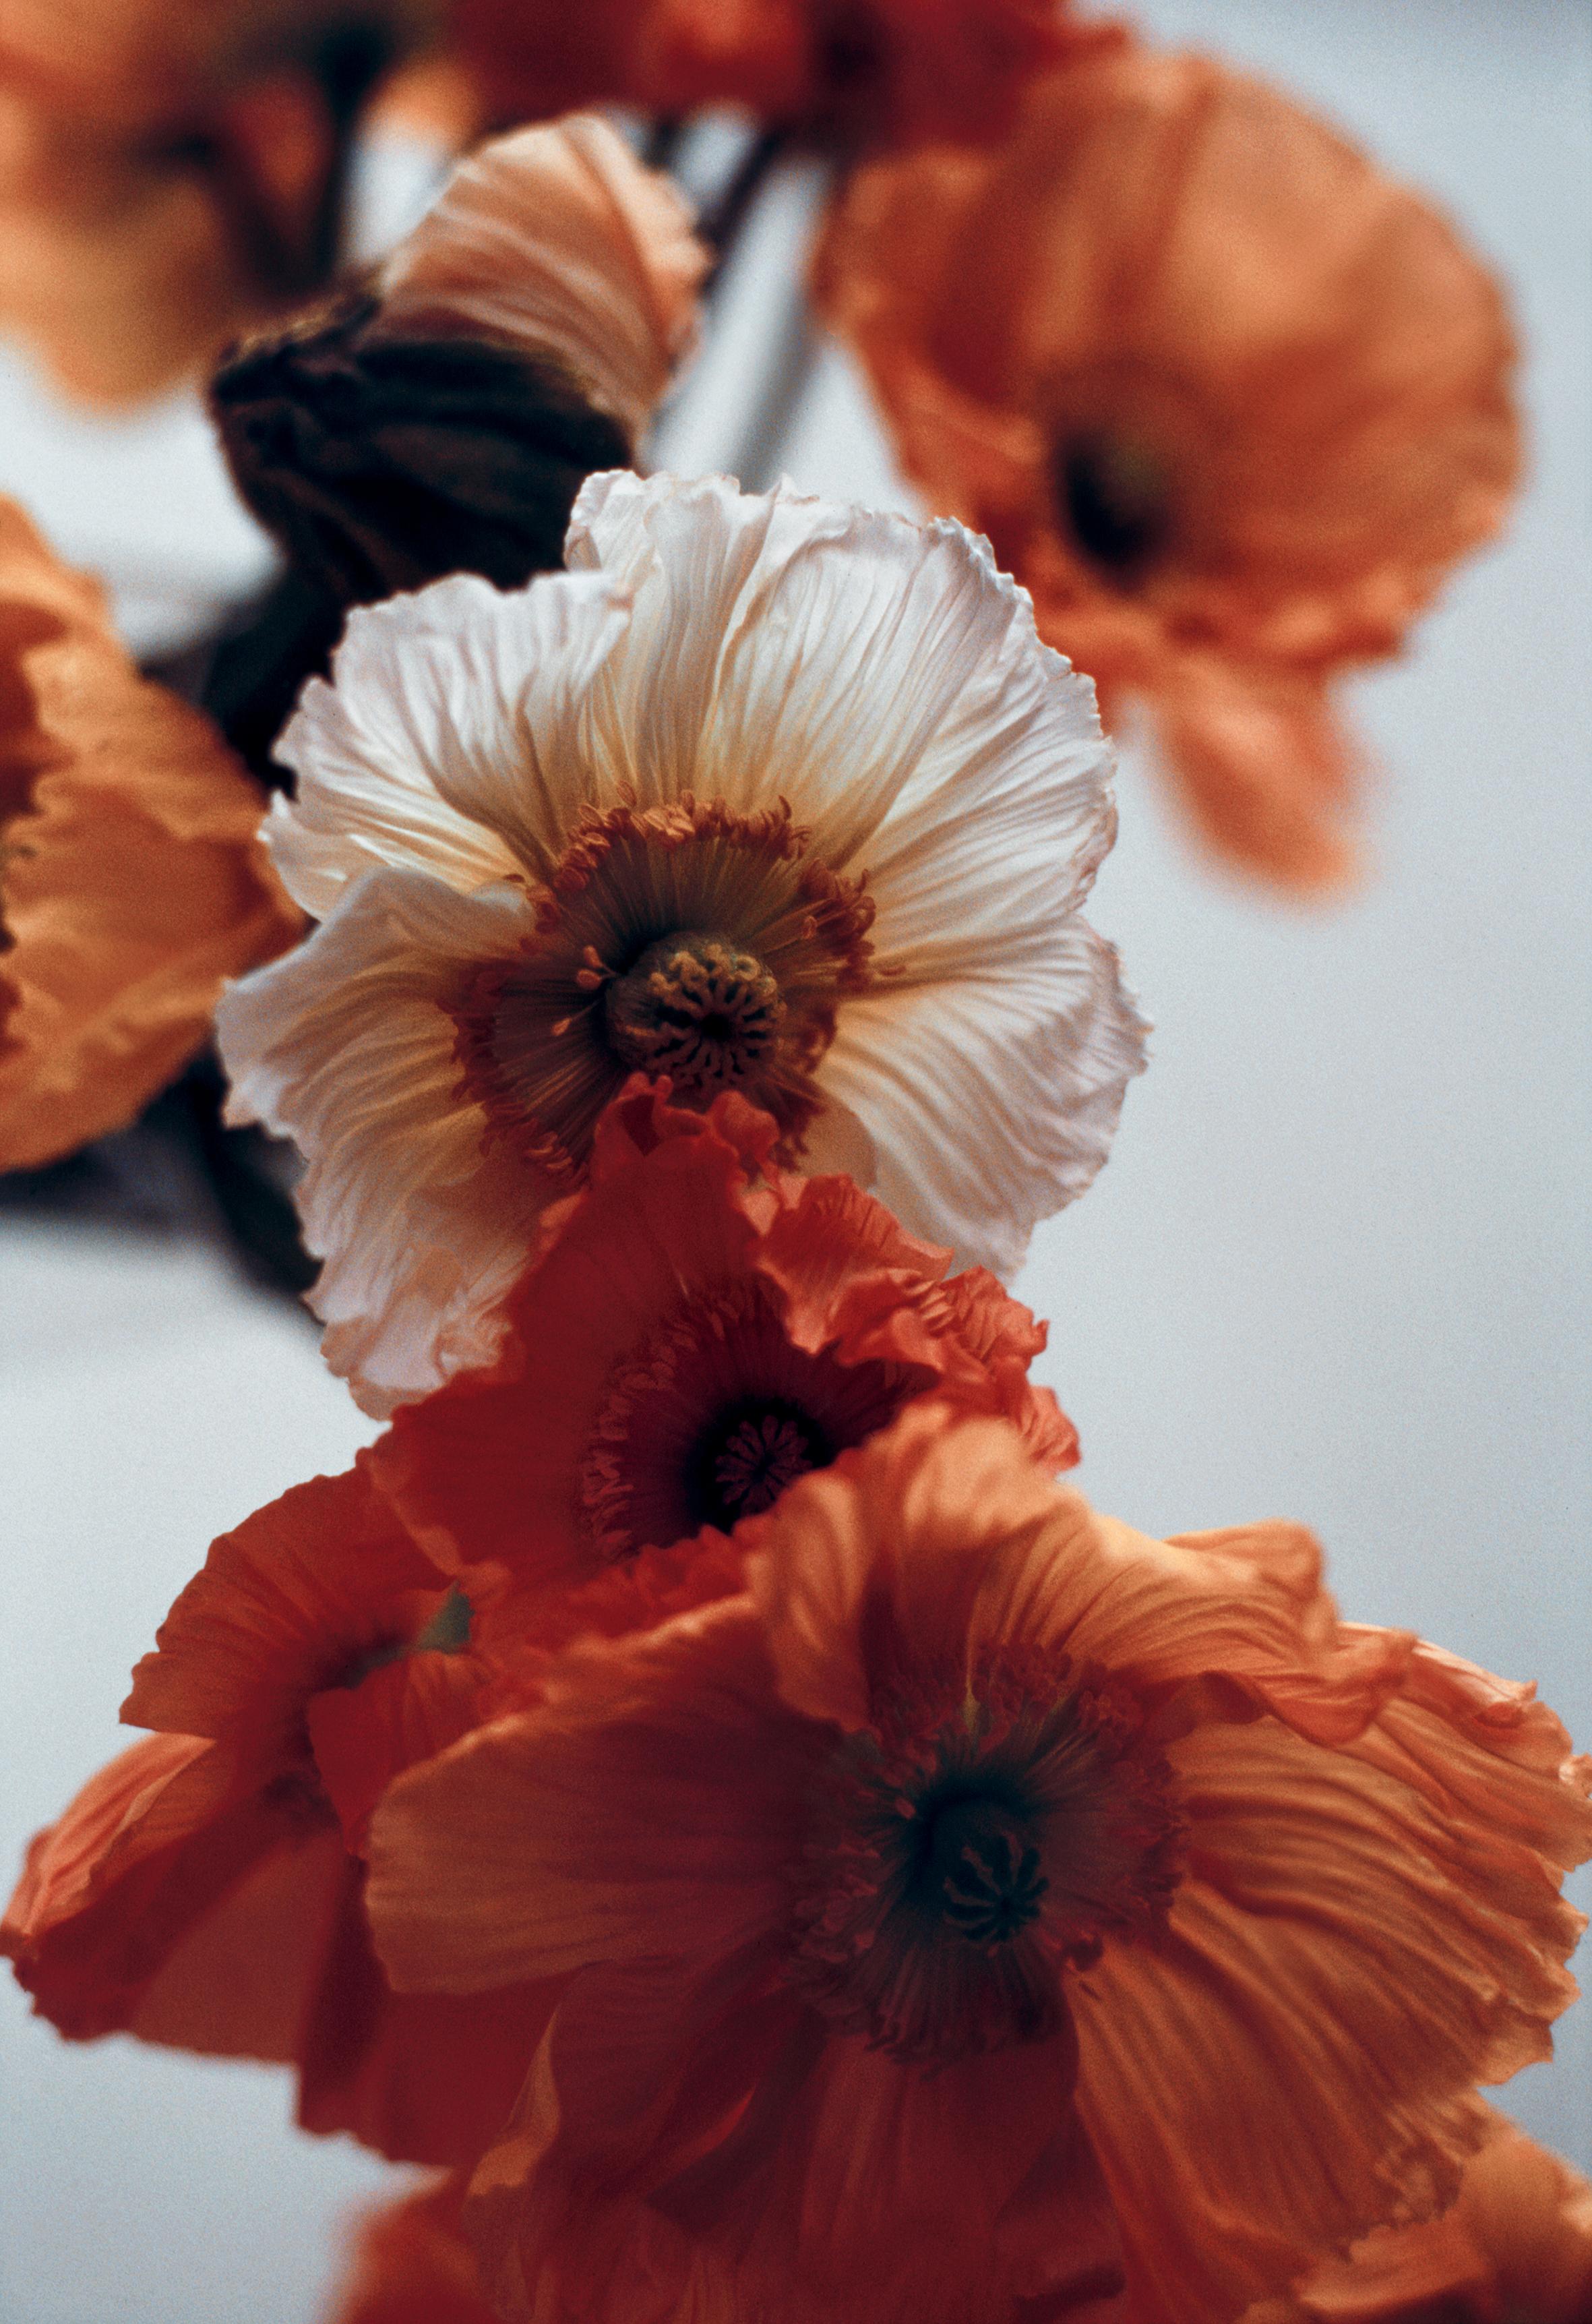 Orange Poppies No.4 - Analogue floral photography, Limited edition of 20